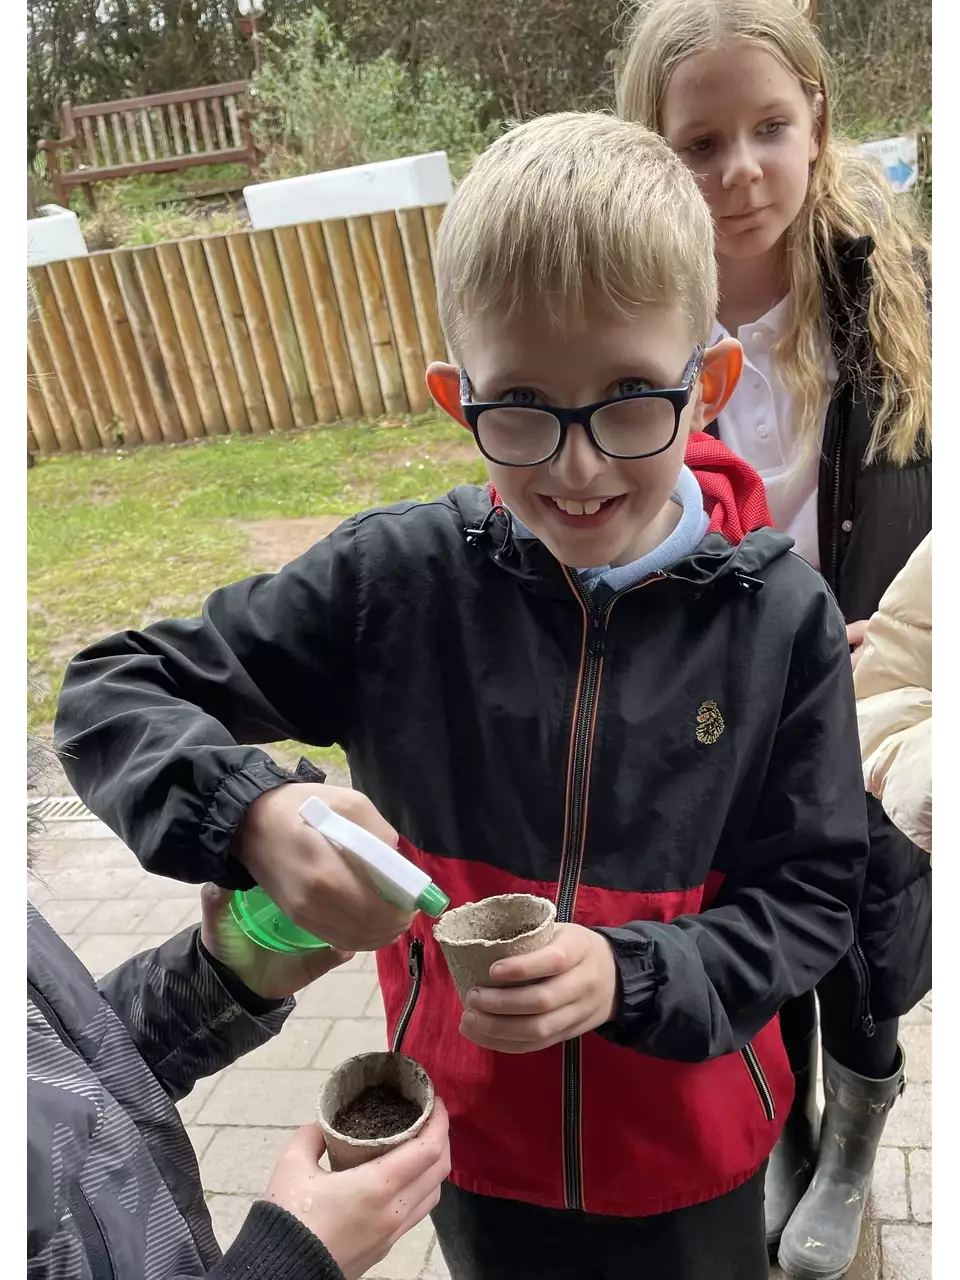 Planting vegetable seeds at Wick Primary School | Asda Longwell Green